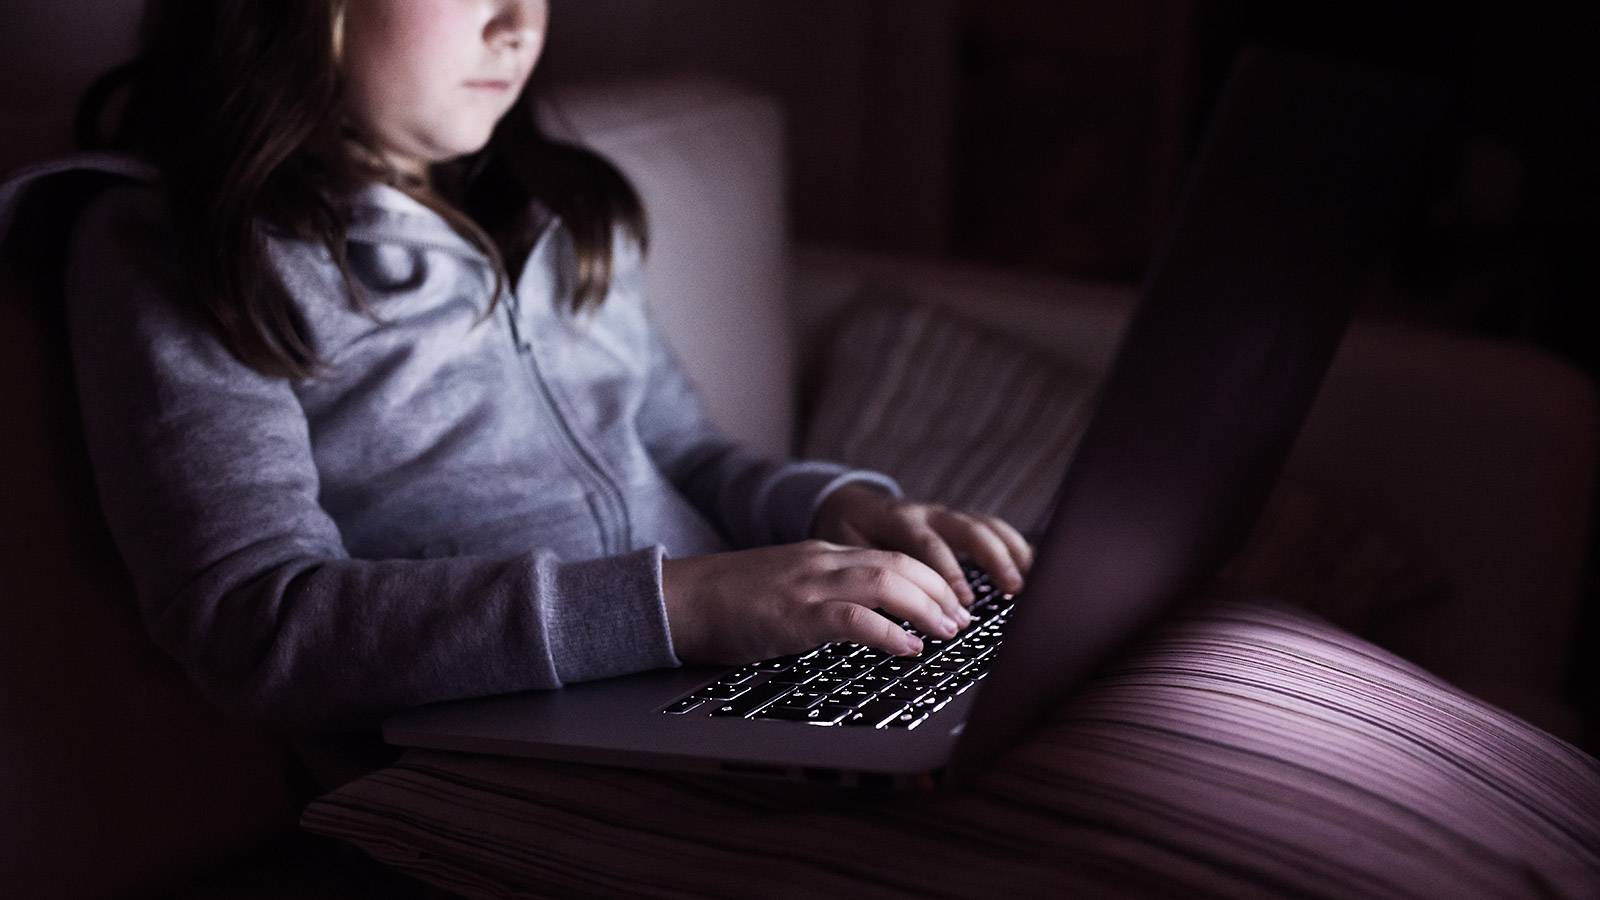 How to protect your child from online grooming and sexual abuse